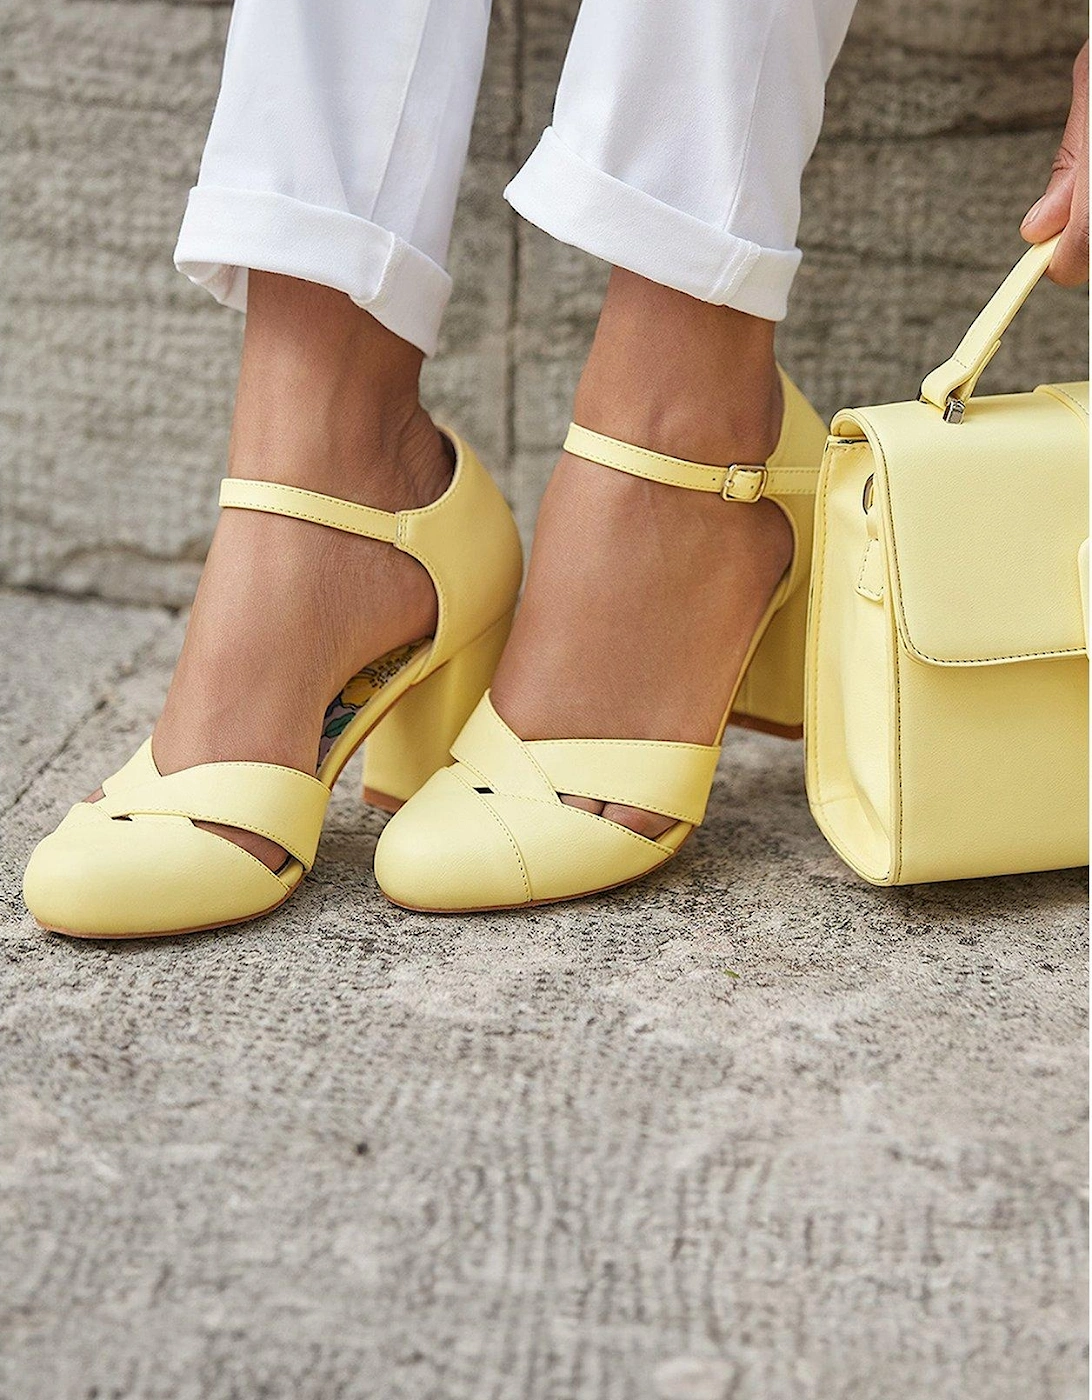 Vintage Style Shoes - Yellow